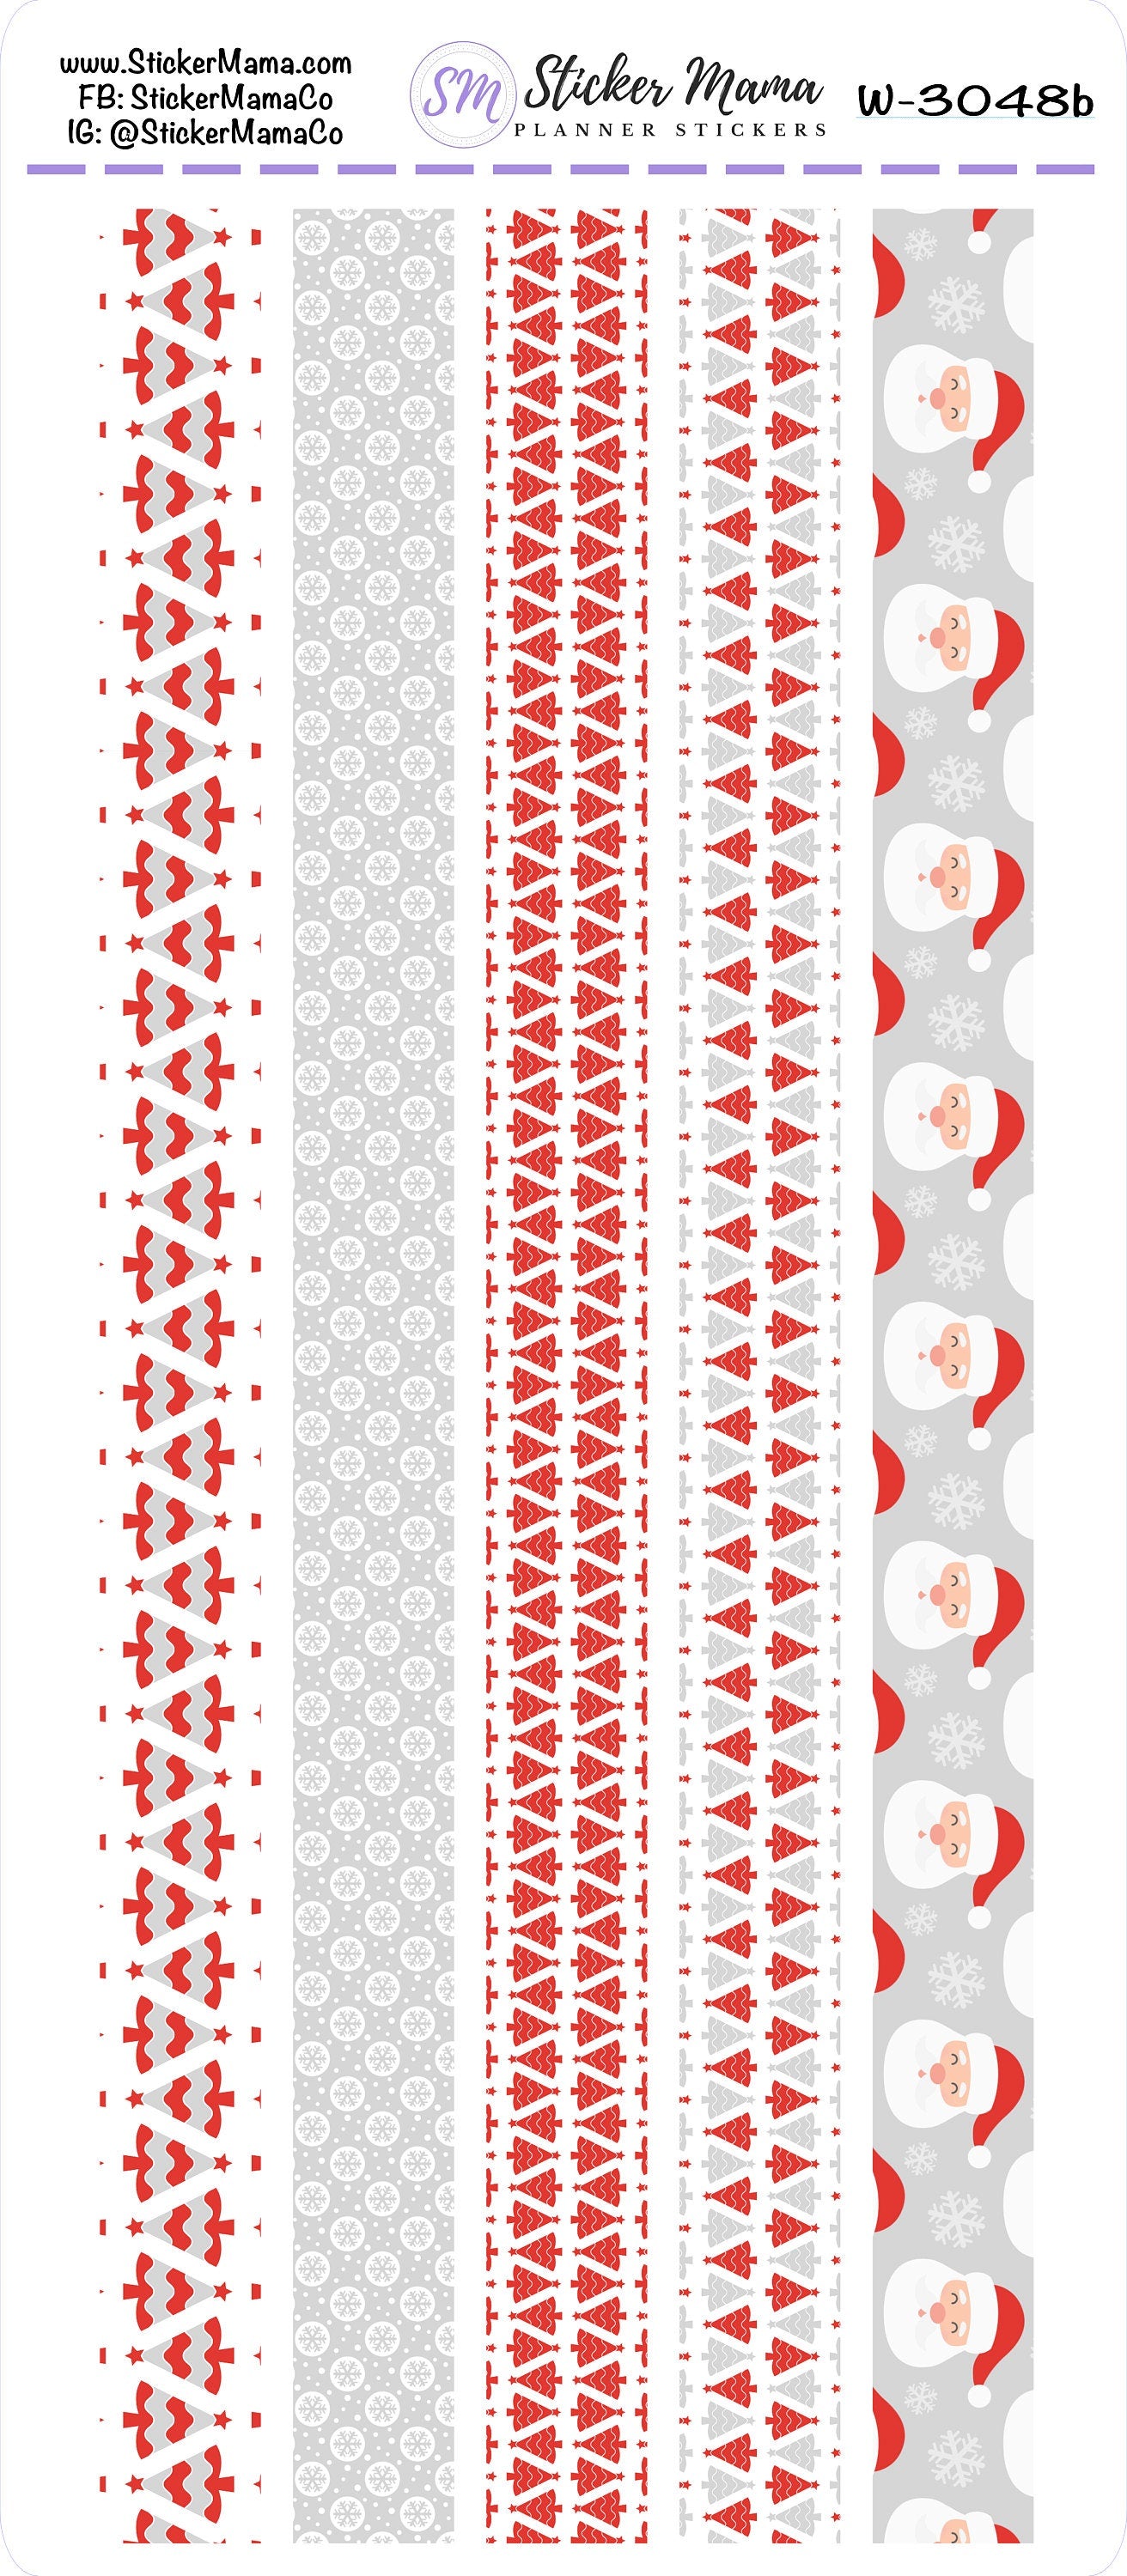 W-3048- WASHI STICKERS - New Christmas - Planner Stickers - Washi for Planners